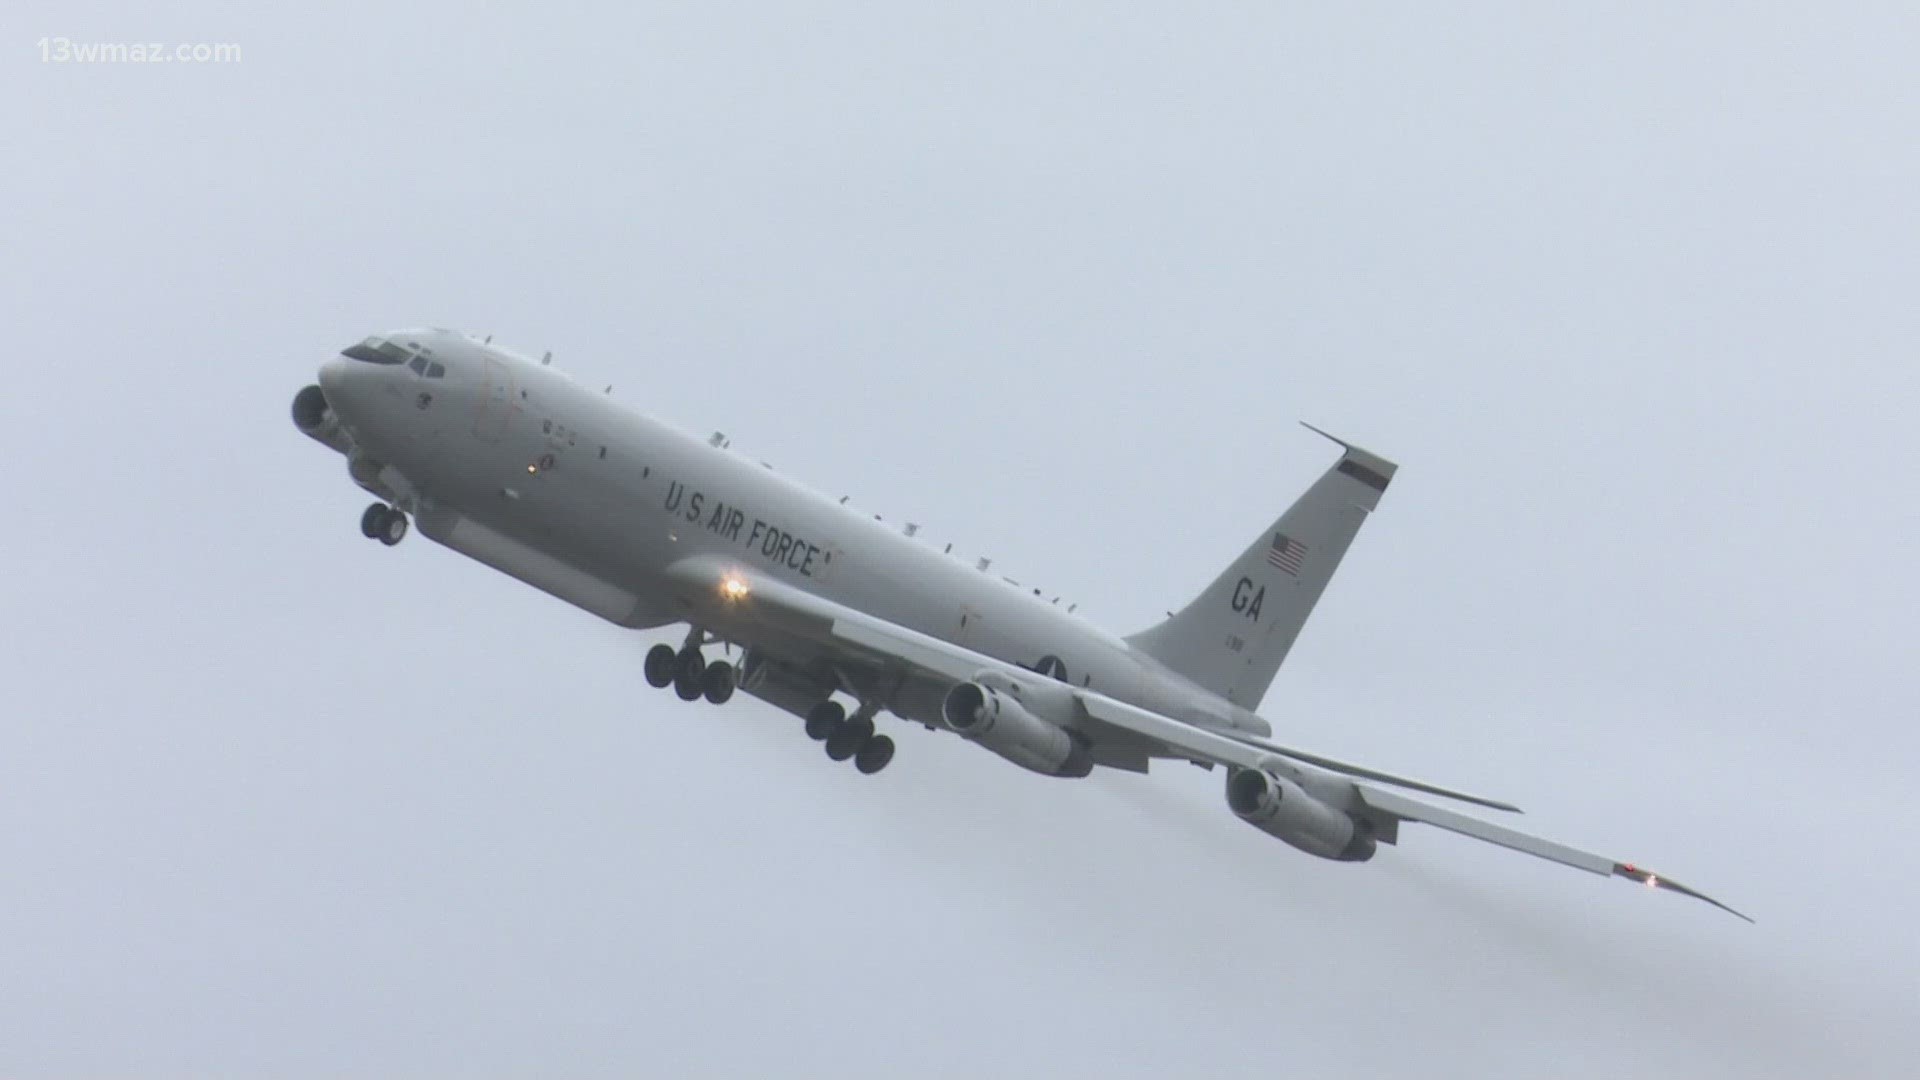 Wednesday marked the official end to the JSTARS mission as the last of 16 E-8C jets left the base.